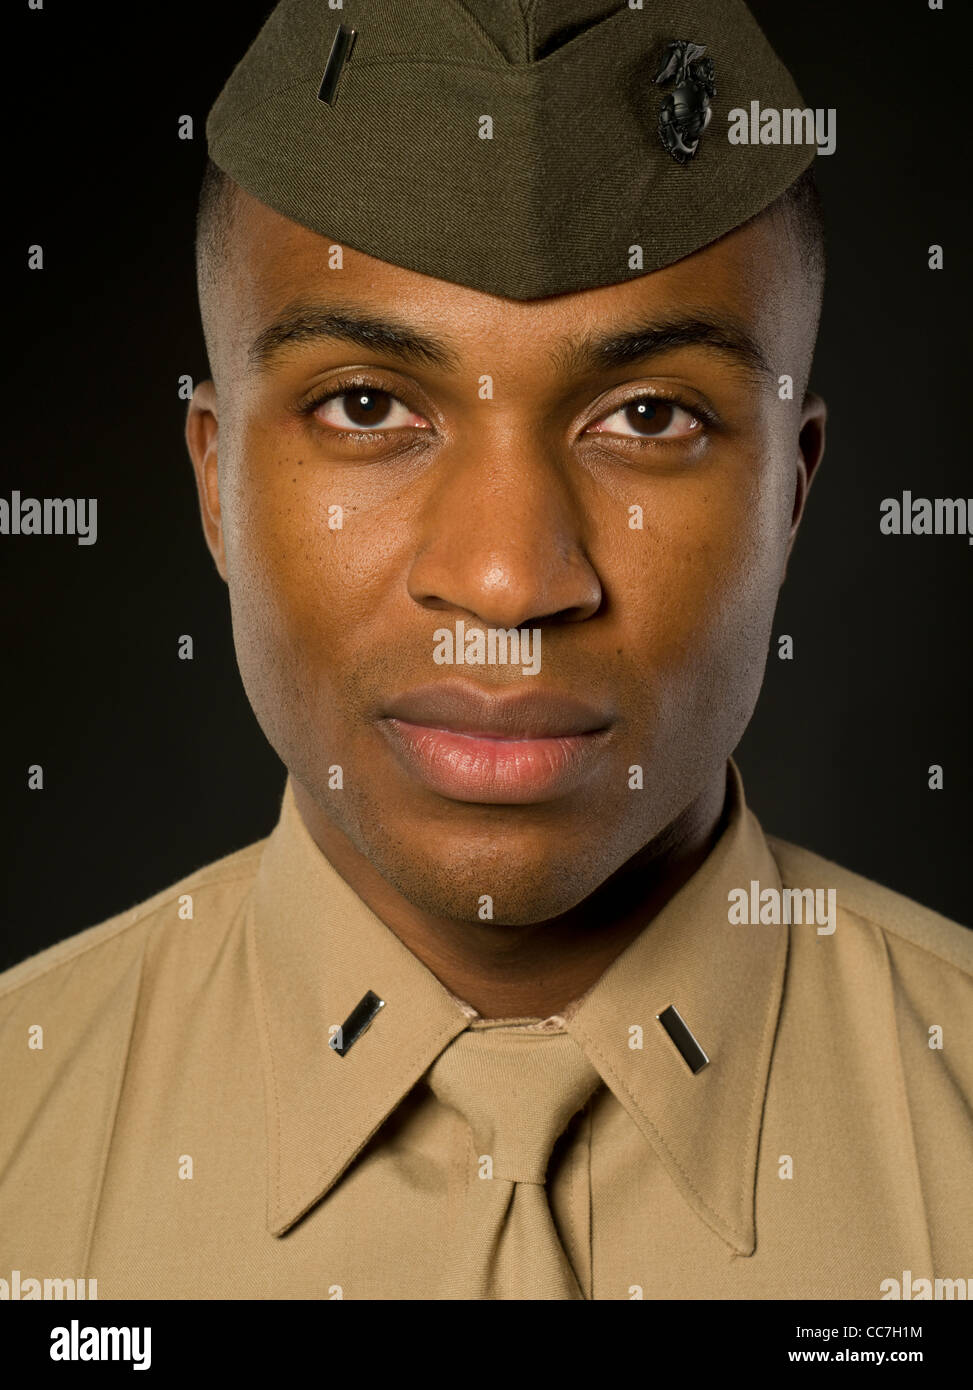 United States Marine Corps Officer in Service B ( Bravos ) Uniform with ...